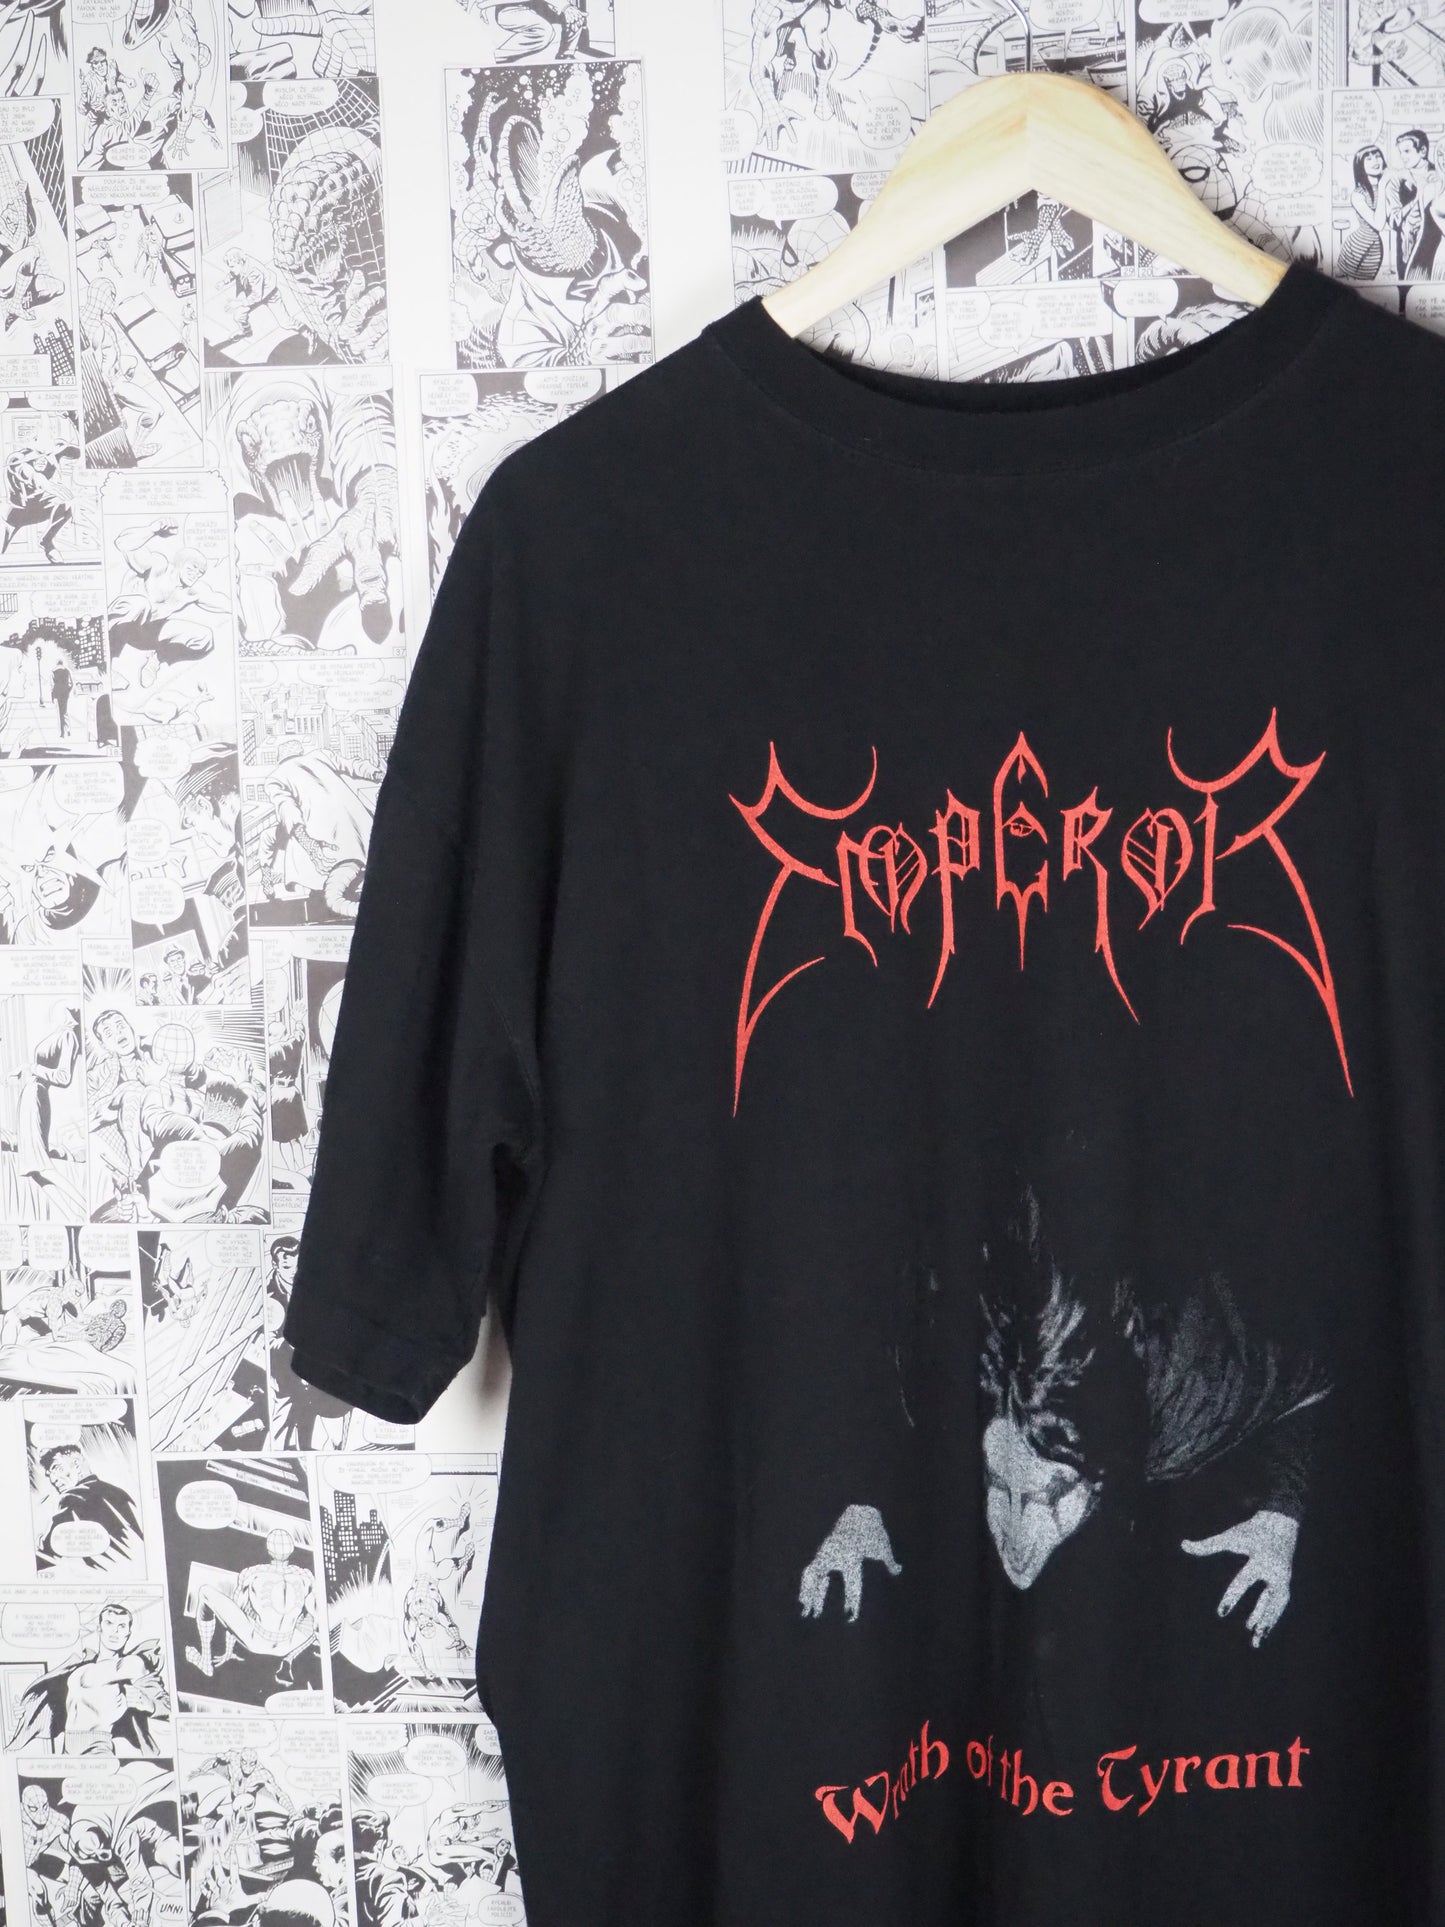 Vintage Emperor "Wrath of the Tyrant" 1992 t-shirt - size XL